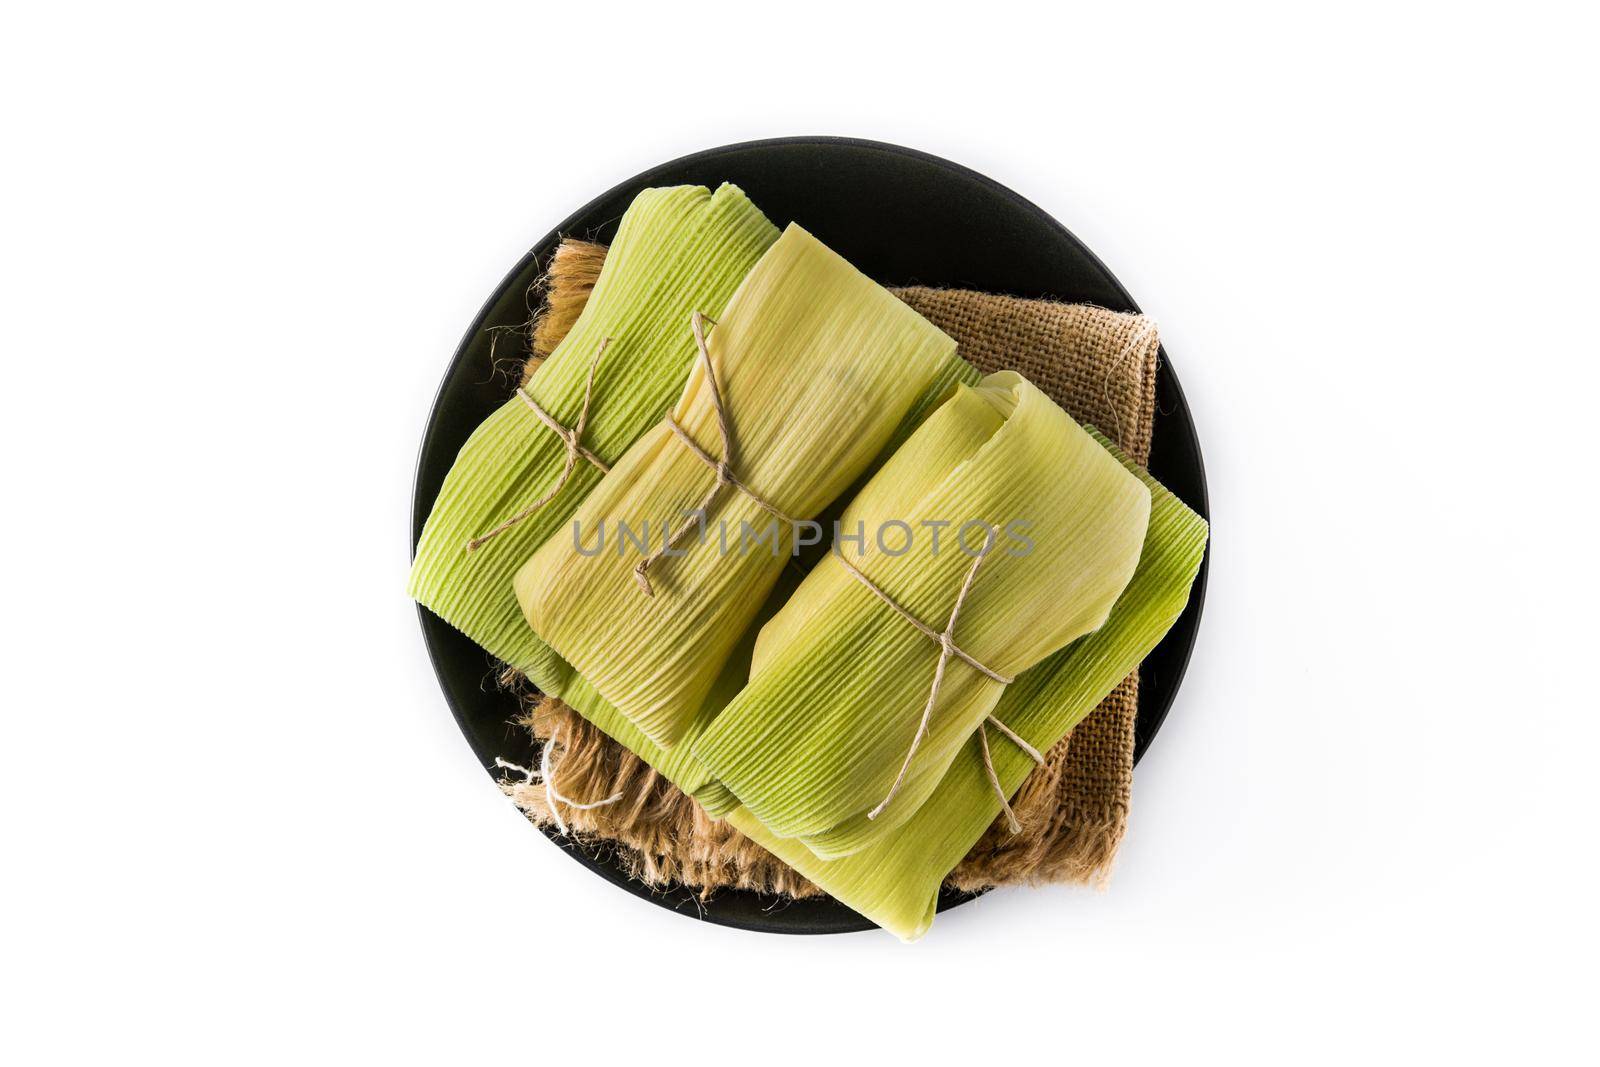 Mexican corn and chicken tamales by chandlervid85